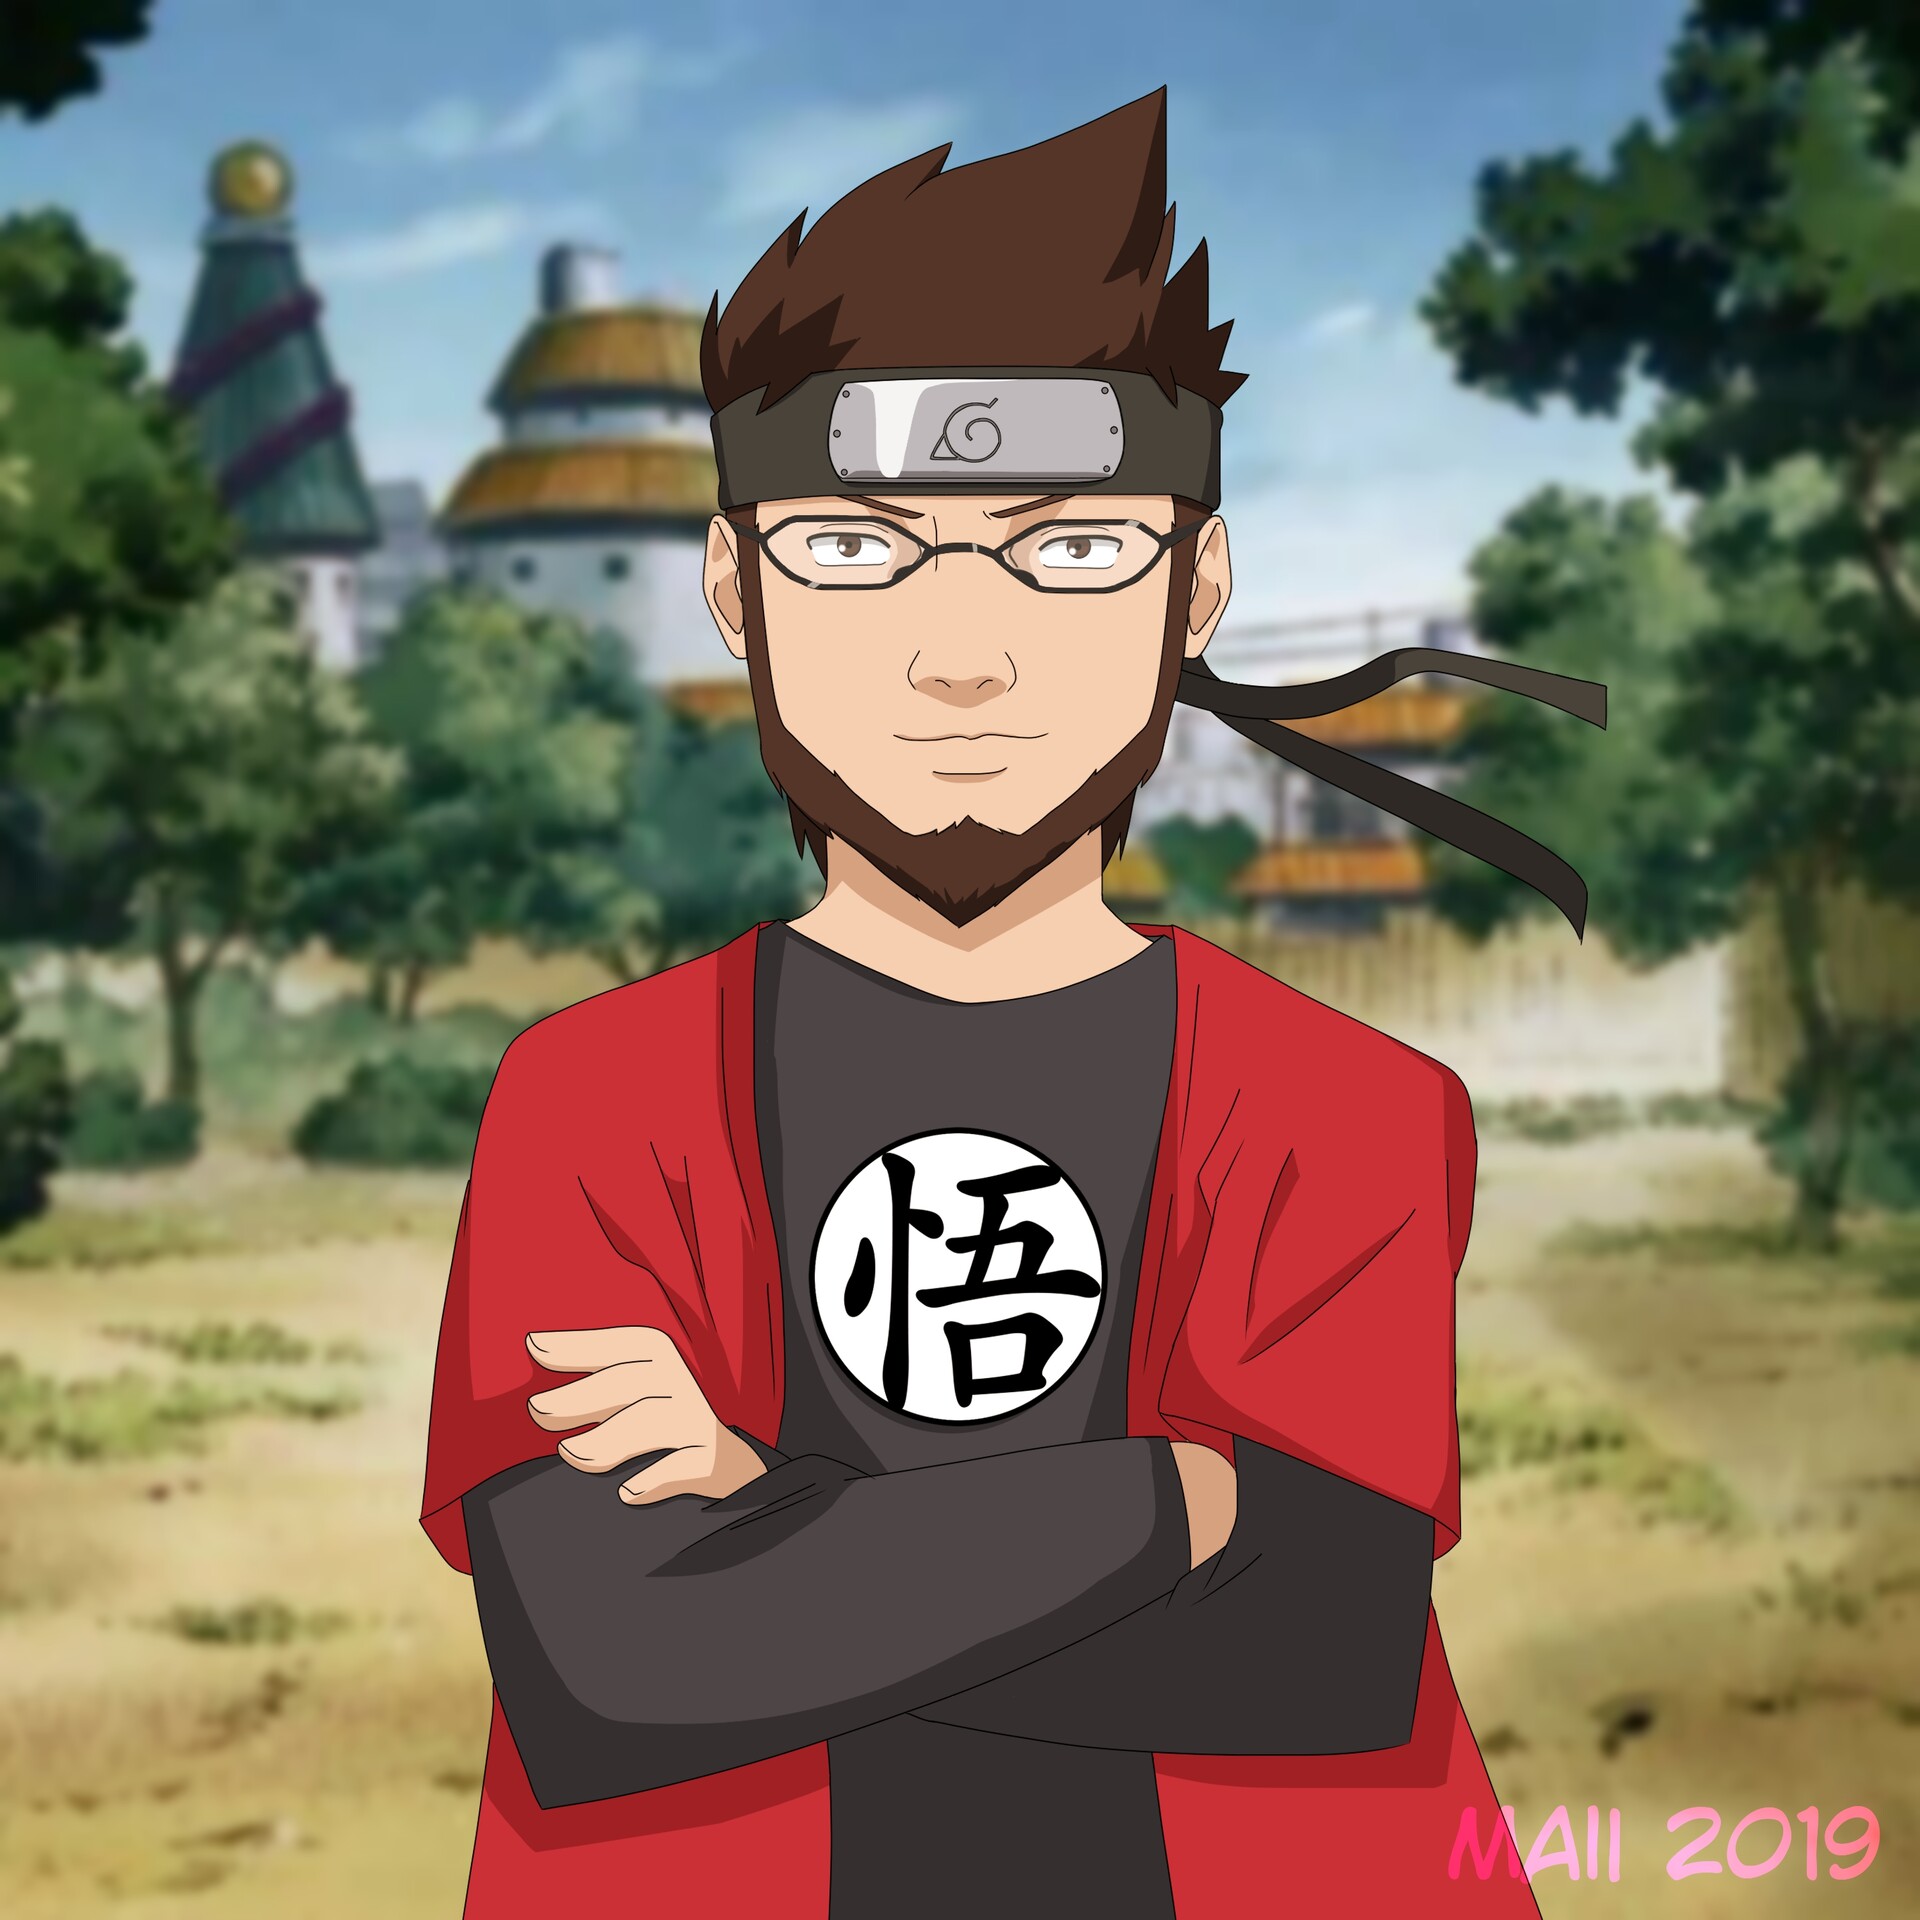 ArtStation - Tried recreating a digital painting of Naruto and